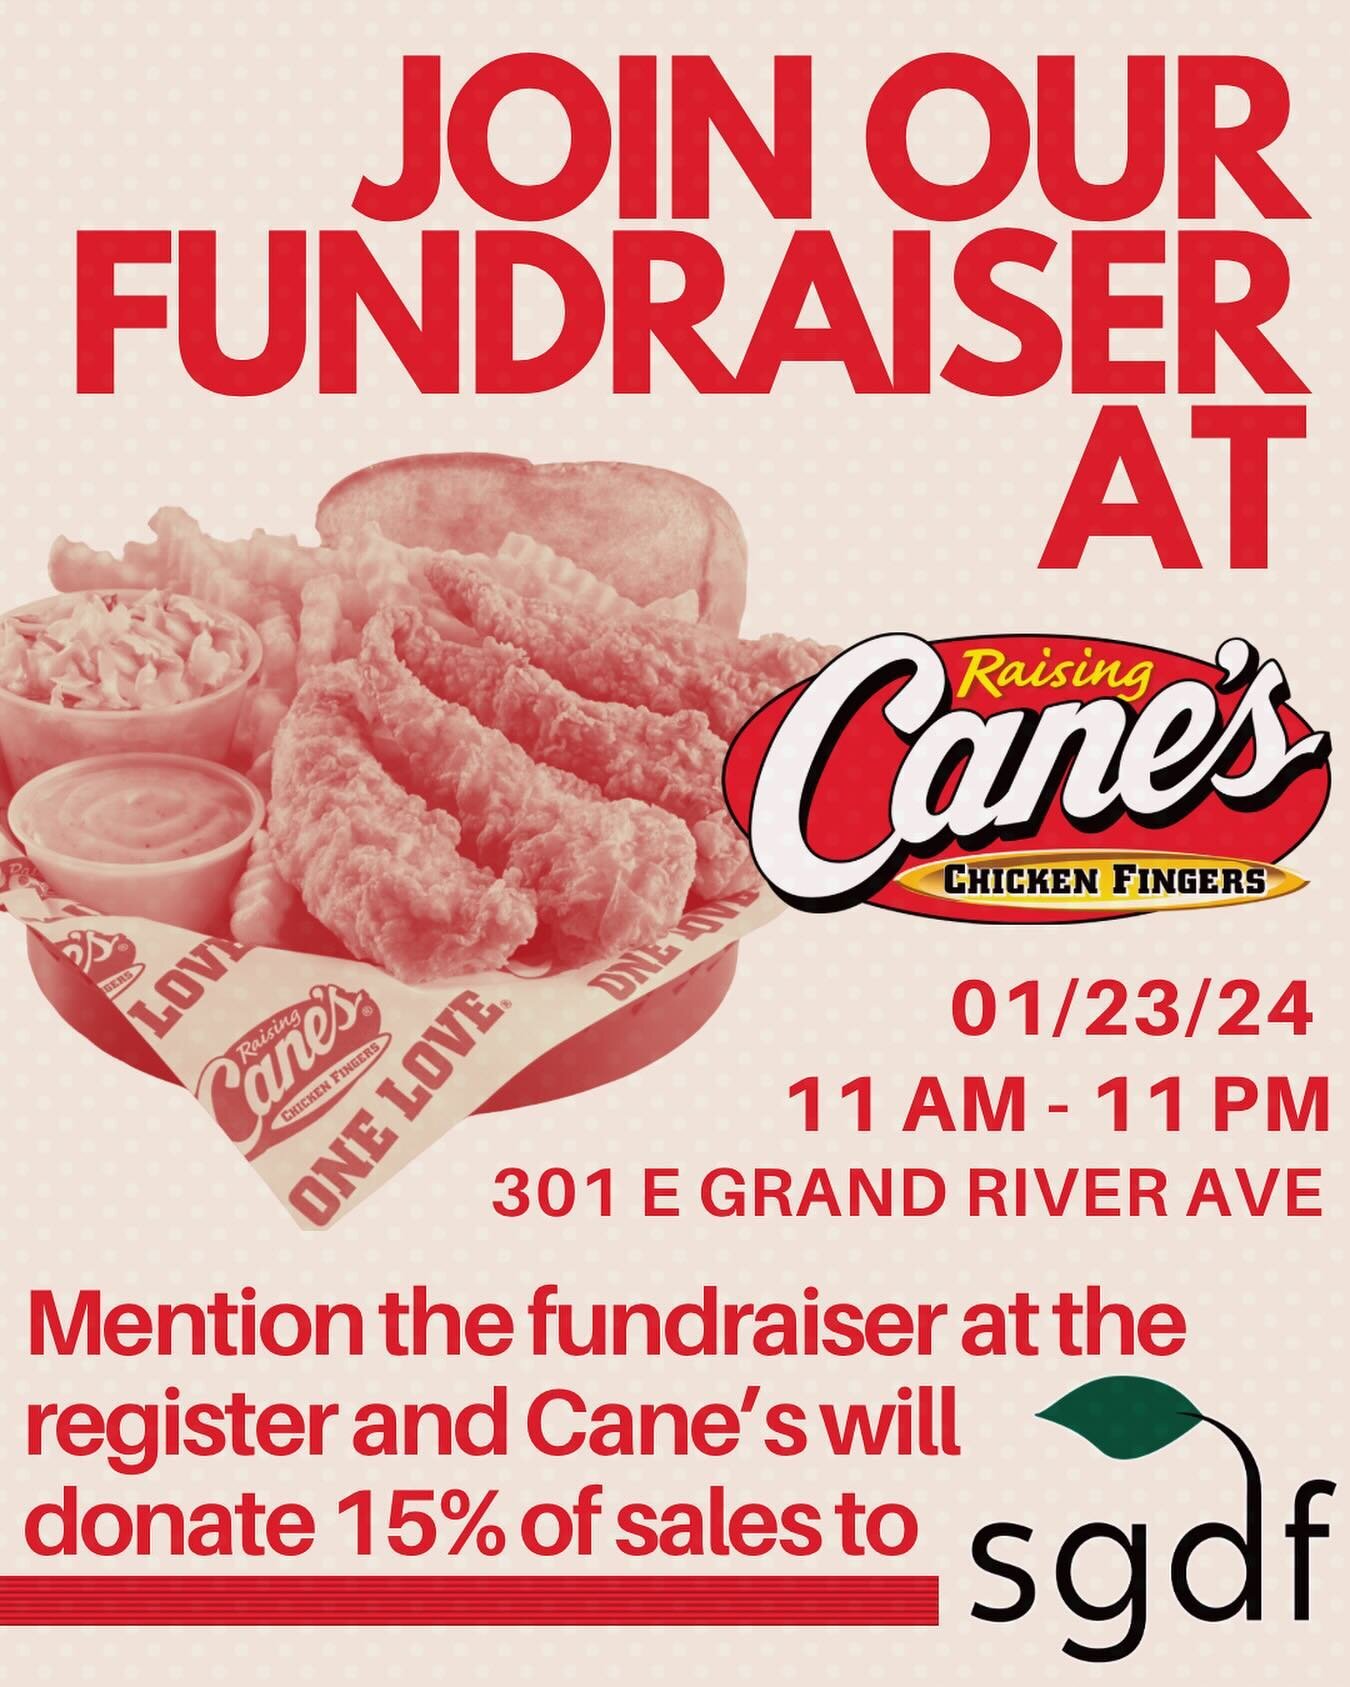 Craving Cane&rsquo;s? Support Spartan Global Development Fund this Tuesday from 11 am - 11 pm at @raisingcanesmsu by mentioning SGDF at the register. 15% of sales goes to SGDF, so we can continue to aid aspiring entrepreneurs all over the globe! 🌎 ?